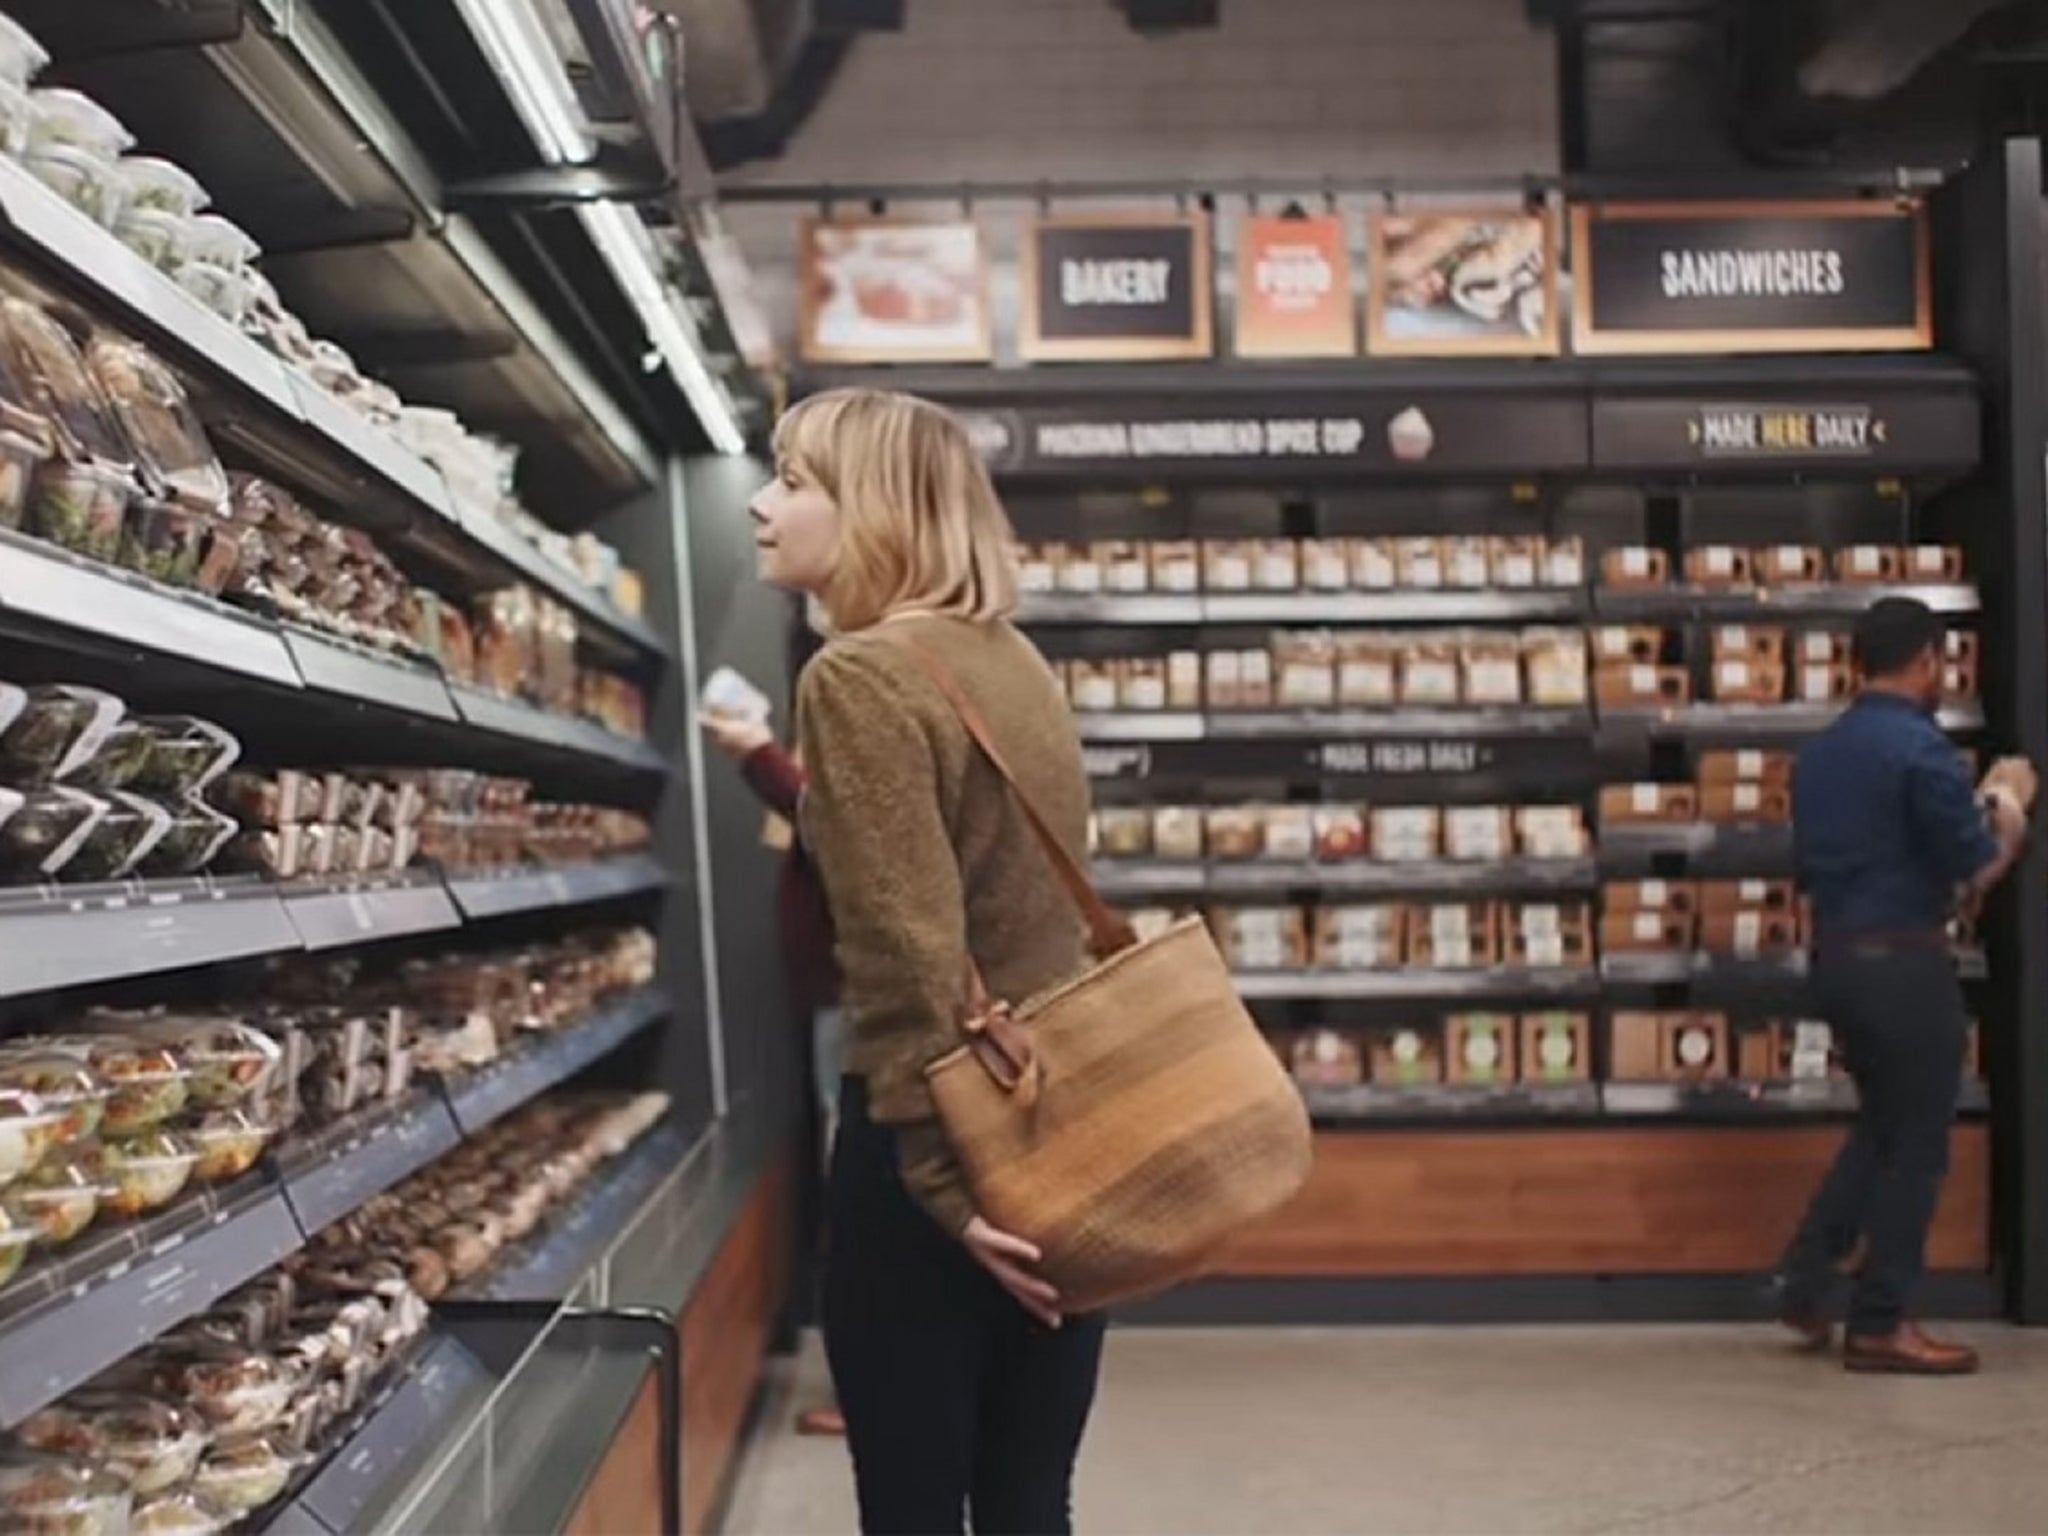 A screen grab of Amazon’s video introducing its new grocery store, Amazon Go